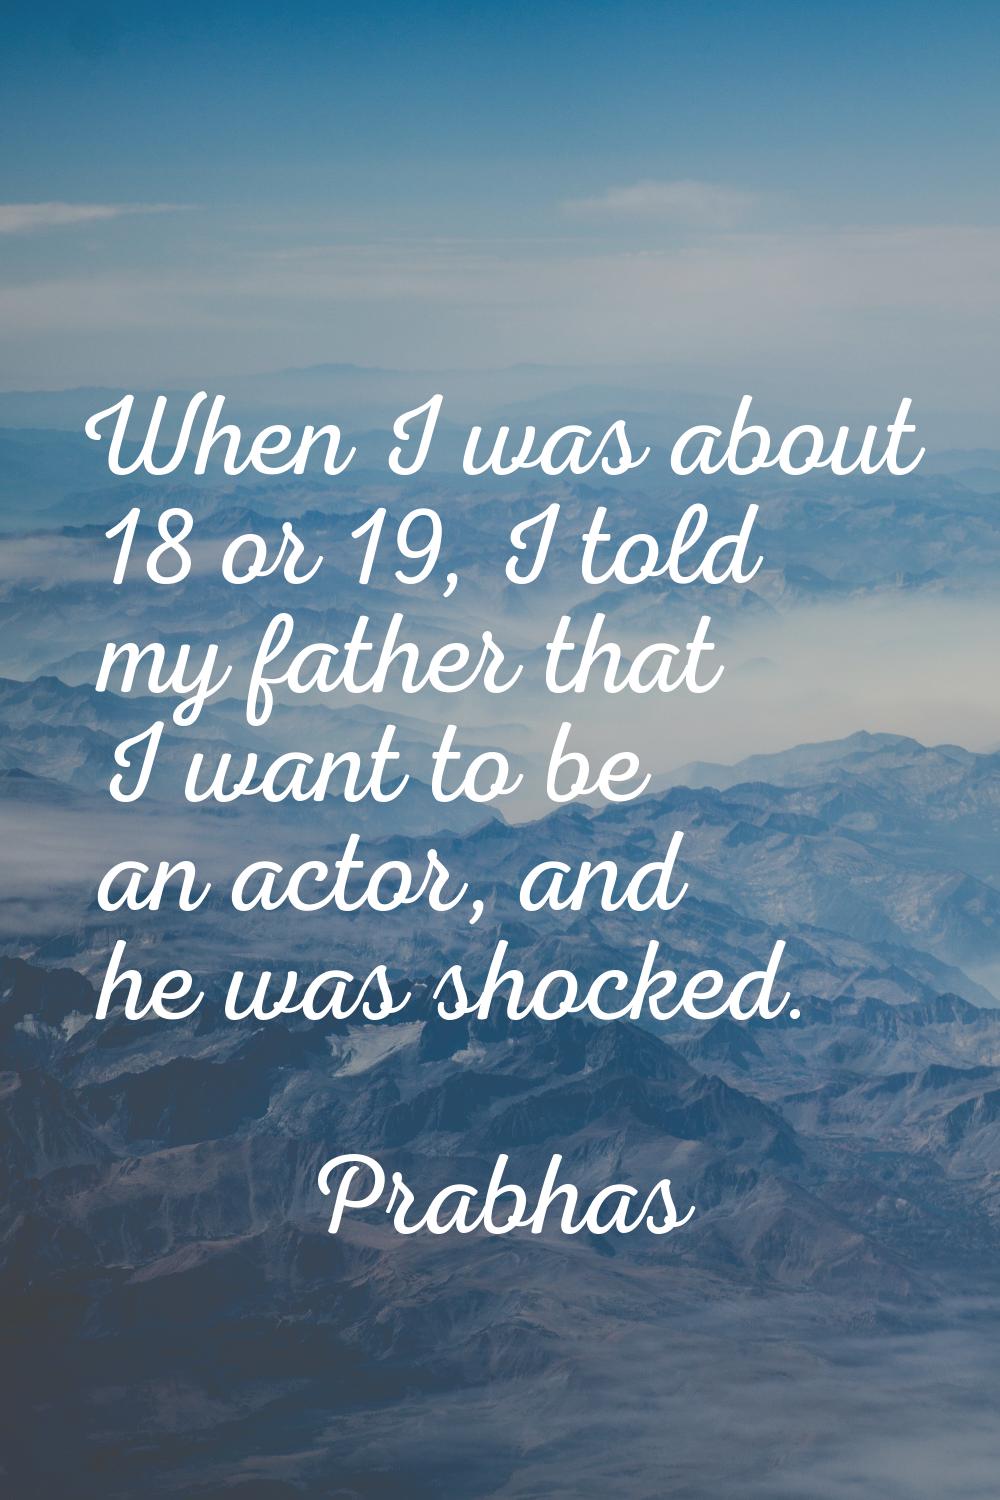 When I was about 18 or 19, I told my father that I want to be an actor, and he was shocked.